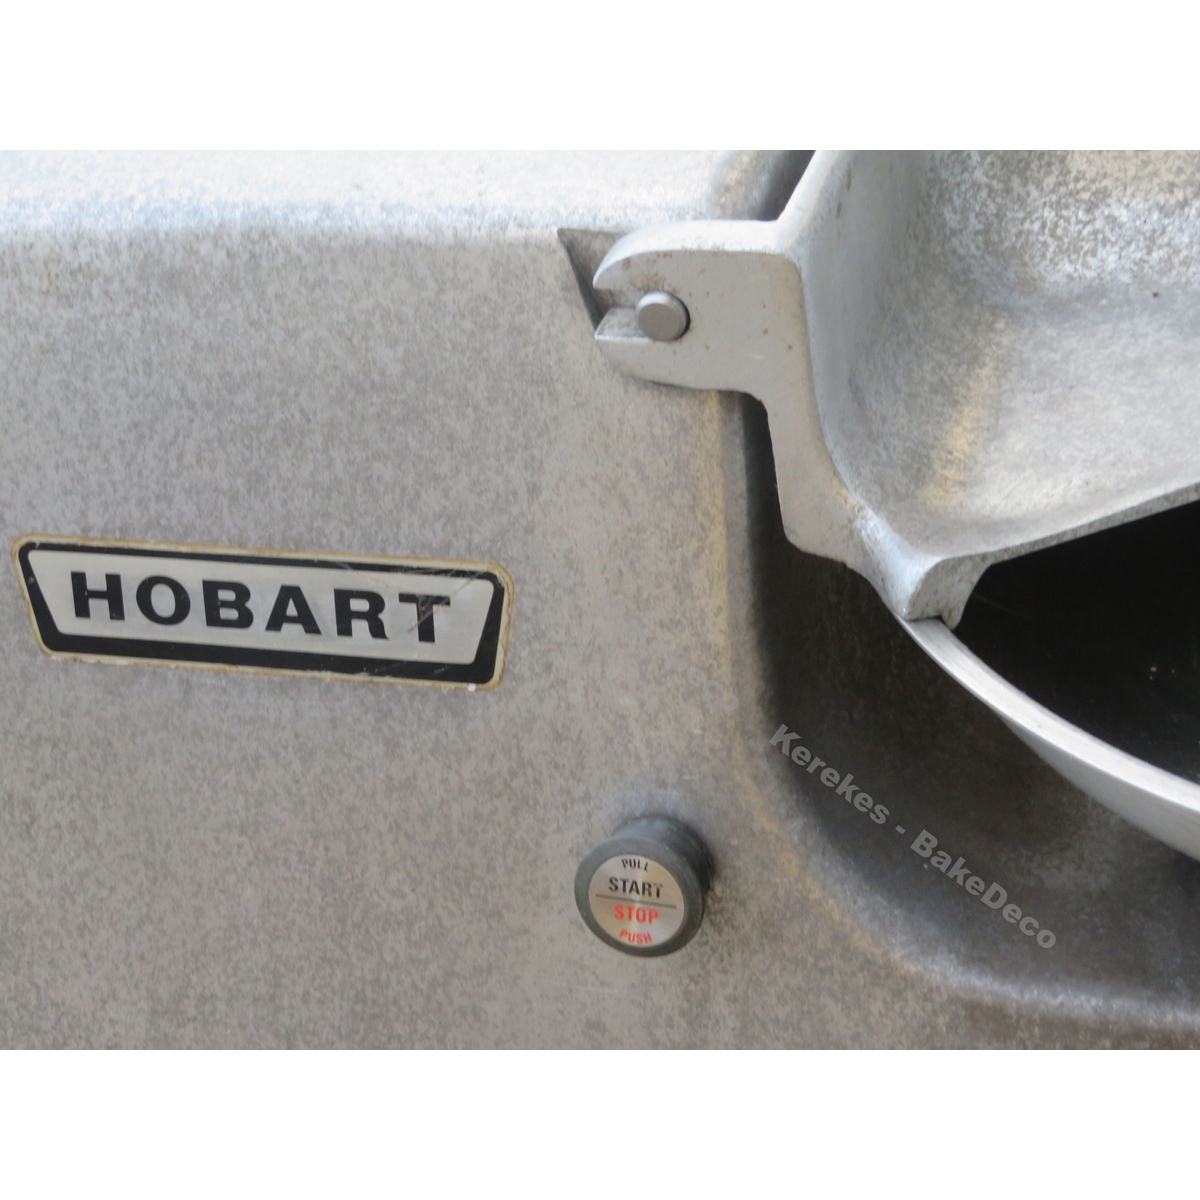 Hobart 84145 Buffalo Food Chopper, Used Excellent Condition image 3